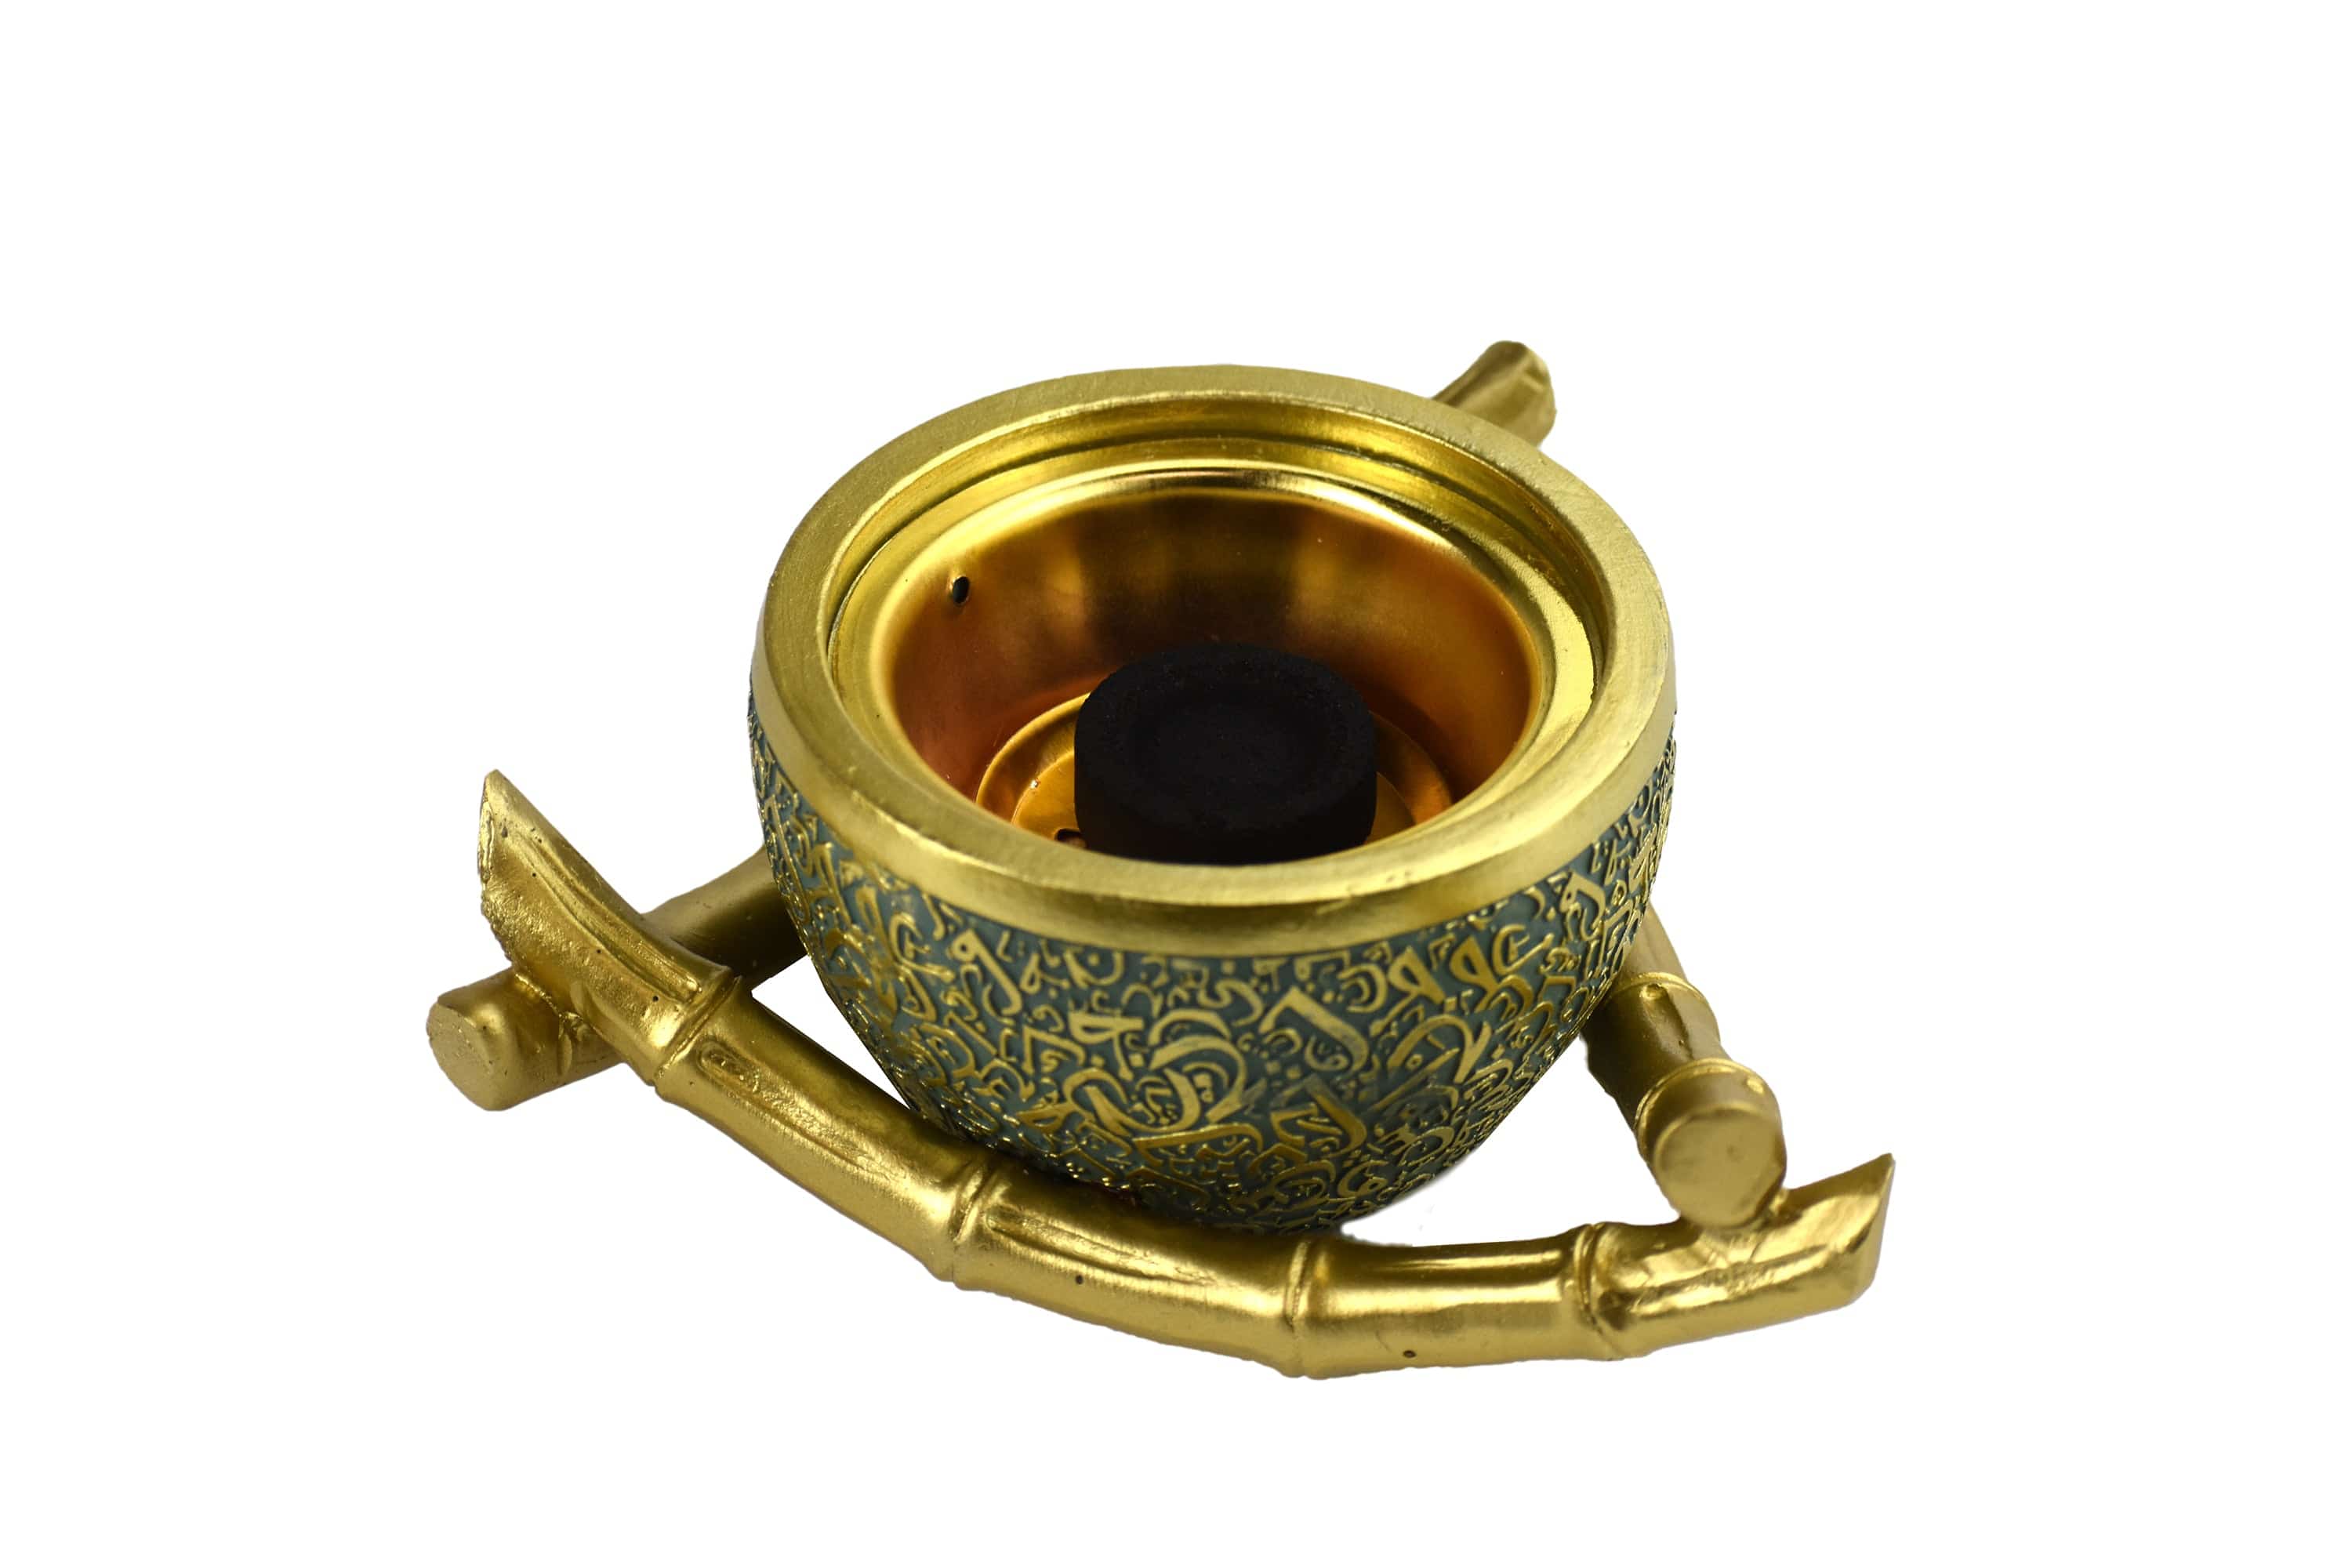 Bamboo Triangle Arabic Script Incense Bakhoor Burner - Teal and Gold - Intense oud